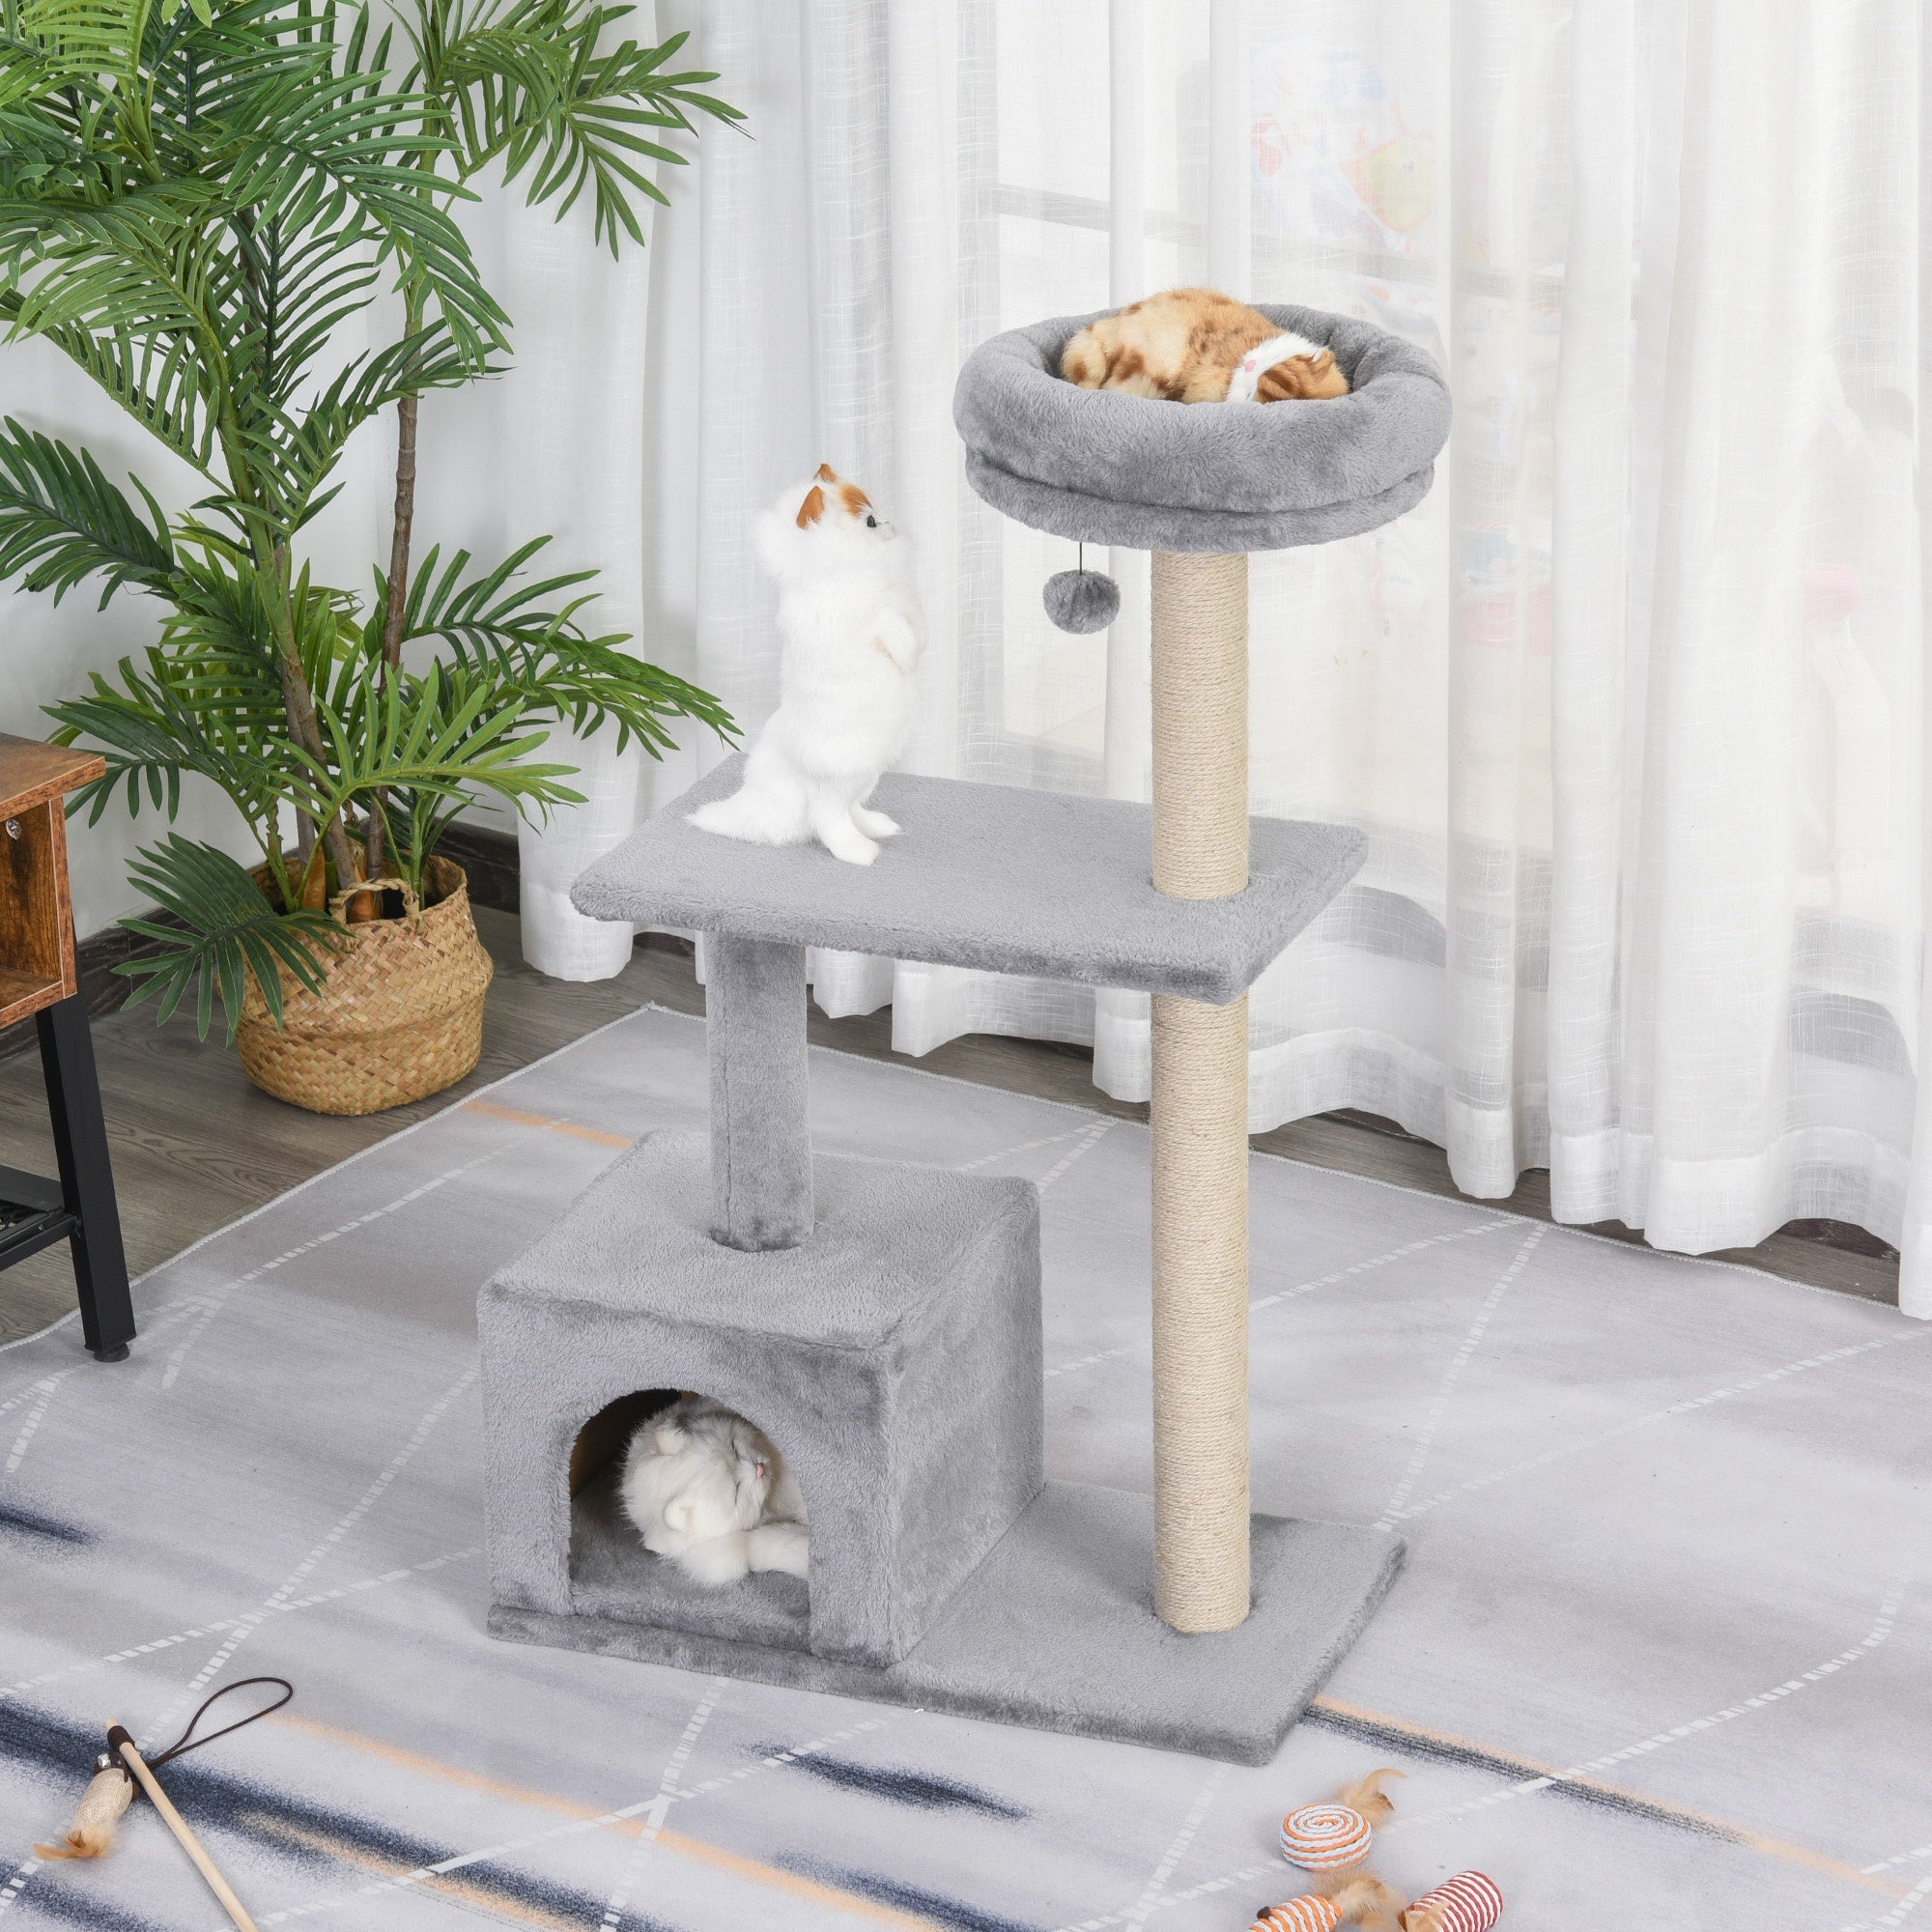 96cm Cat Tree for Indoor Cats Condo Sisal Scratching Post Cat Tower Kitten Play House Dangling Ball Activity Center Furniture Grey, PawHut,